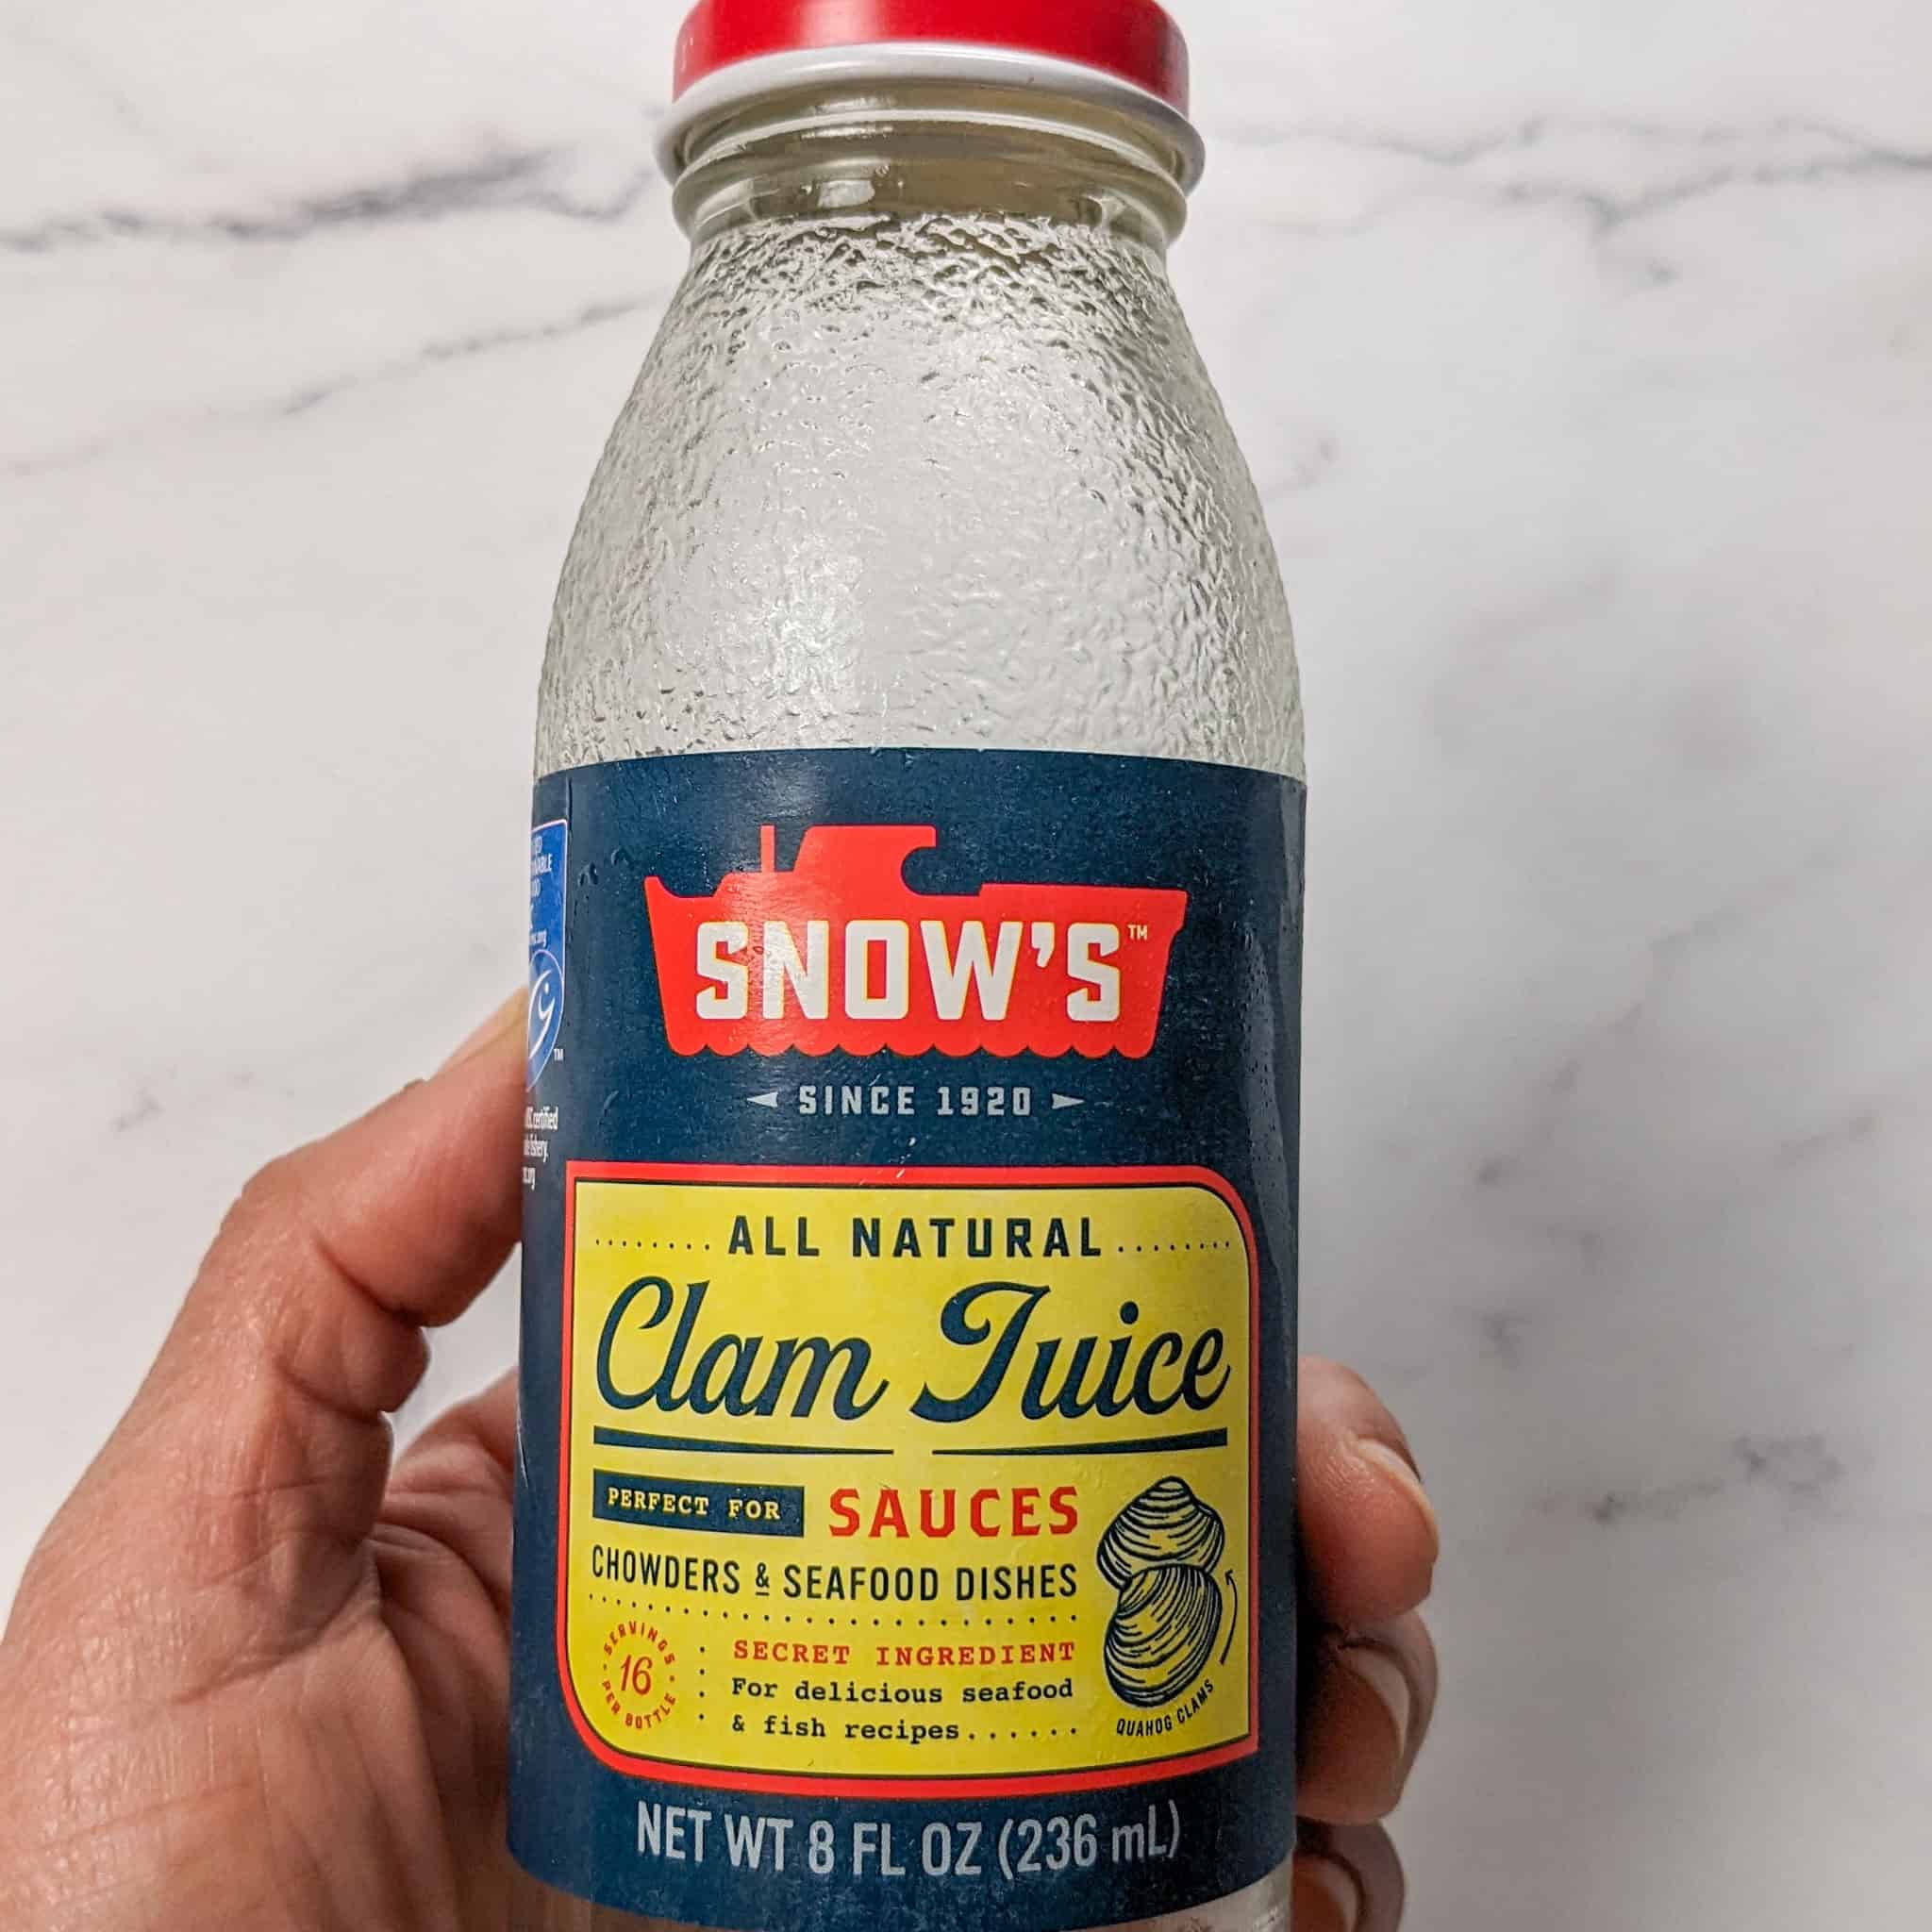 holding Snow's All Natural Clam Juice glass bottle.